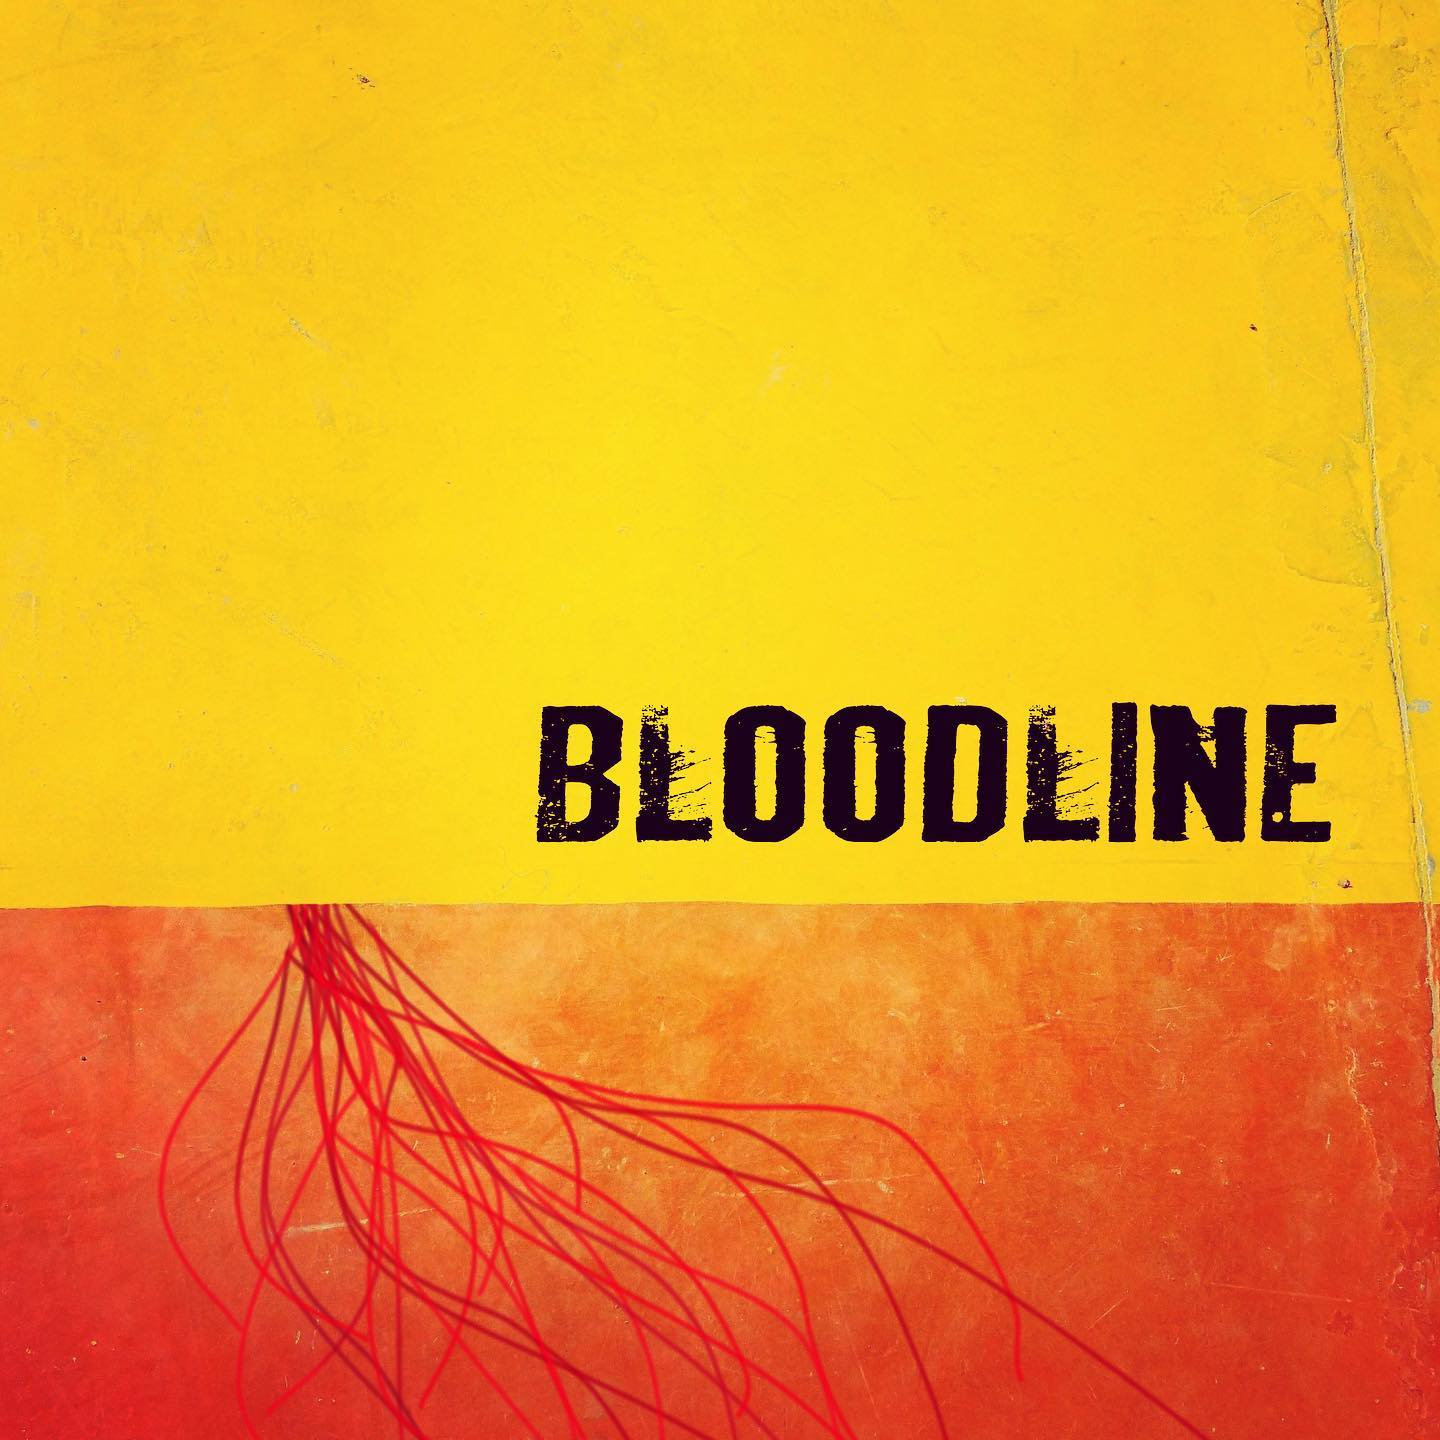 BRIAN EL DORADO AND THE TUESDAY PEOPLE RELEASE ‘BLOODLINE’